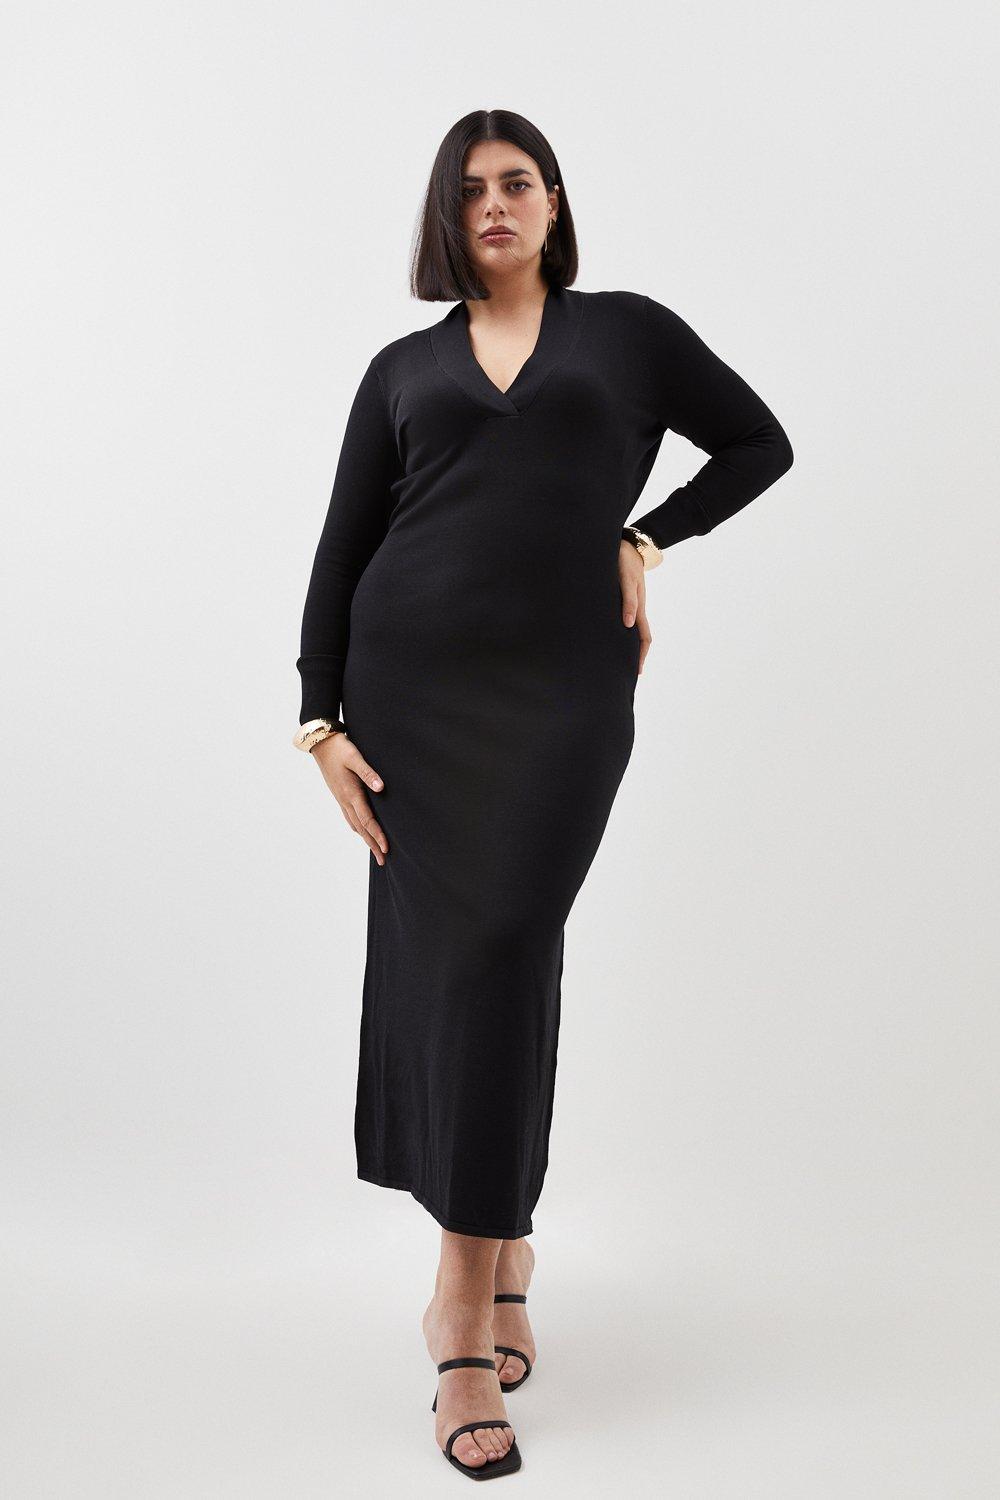 Plus Size Viscose Blend Knit Midaxi Dress With Shawl Collar